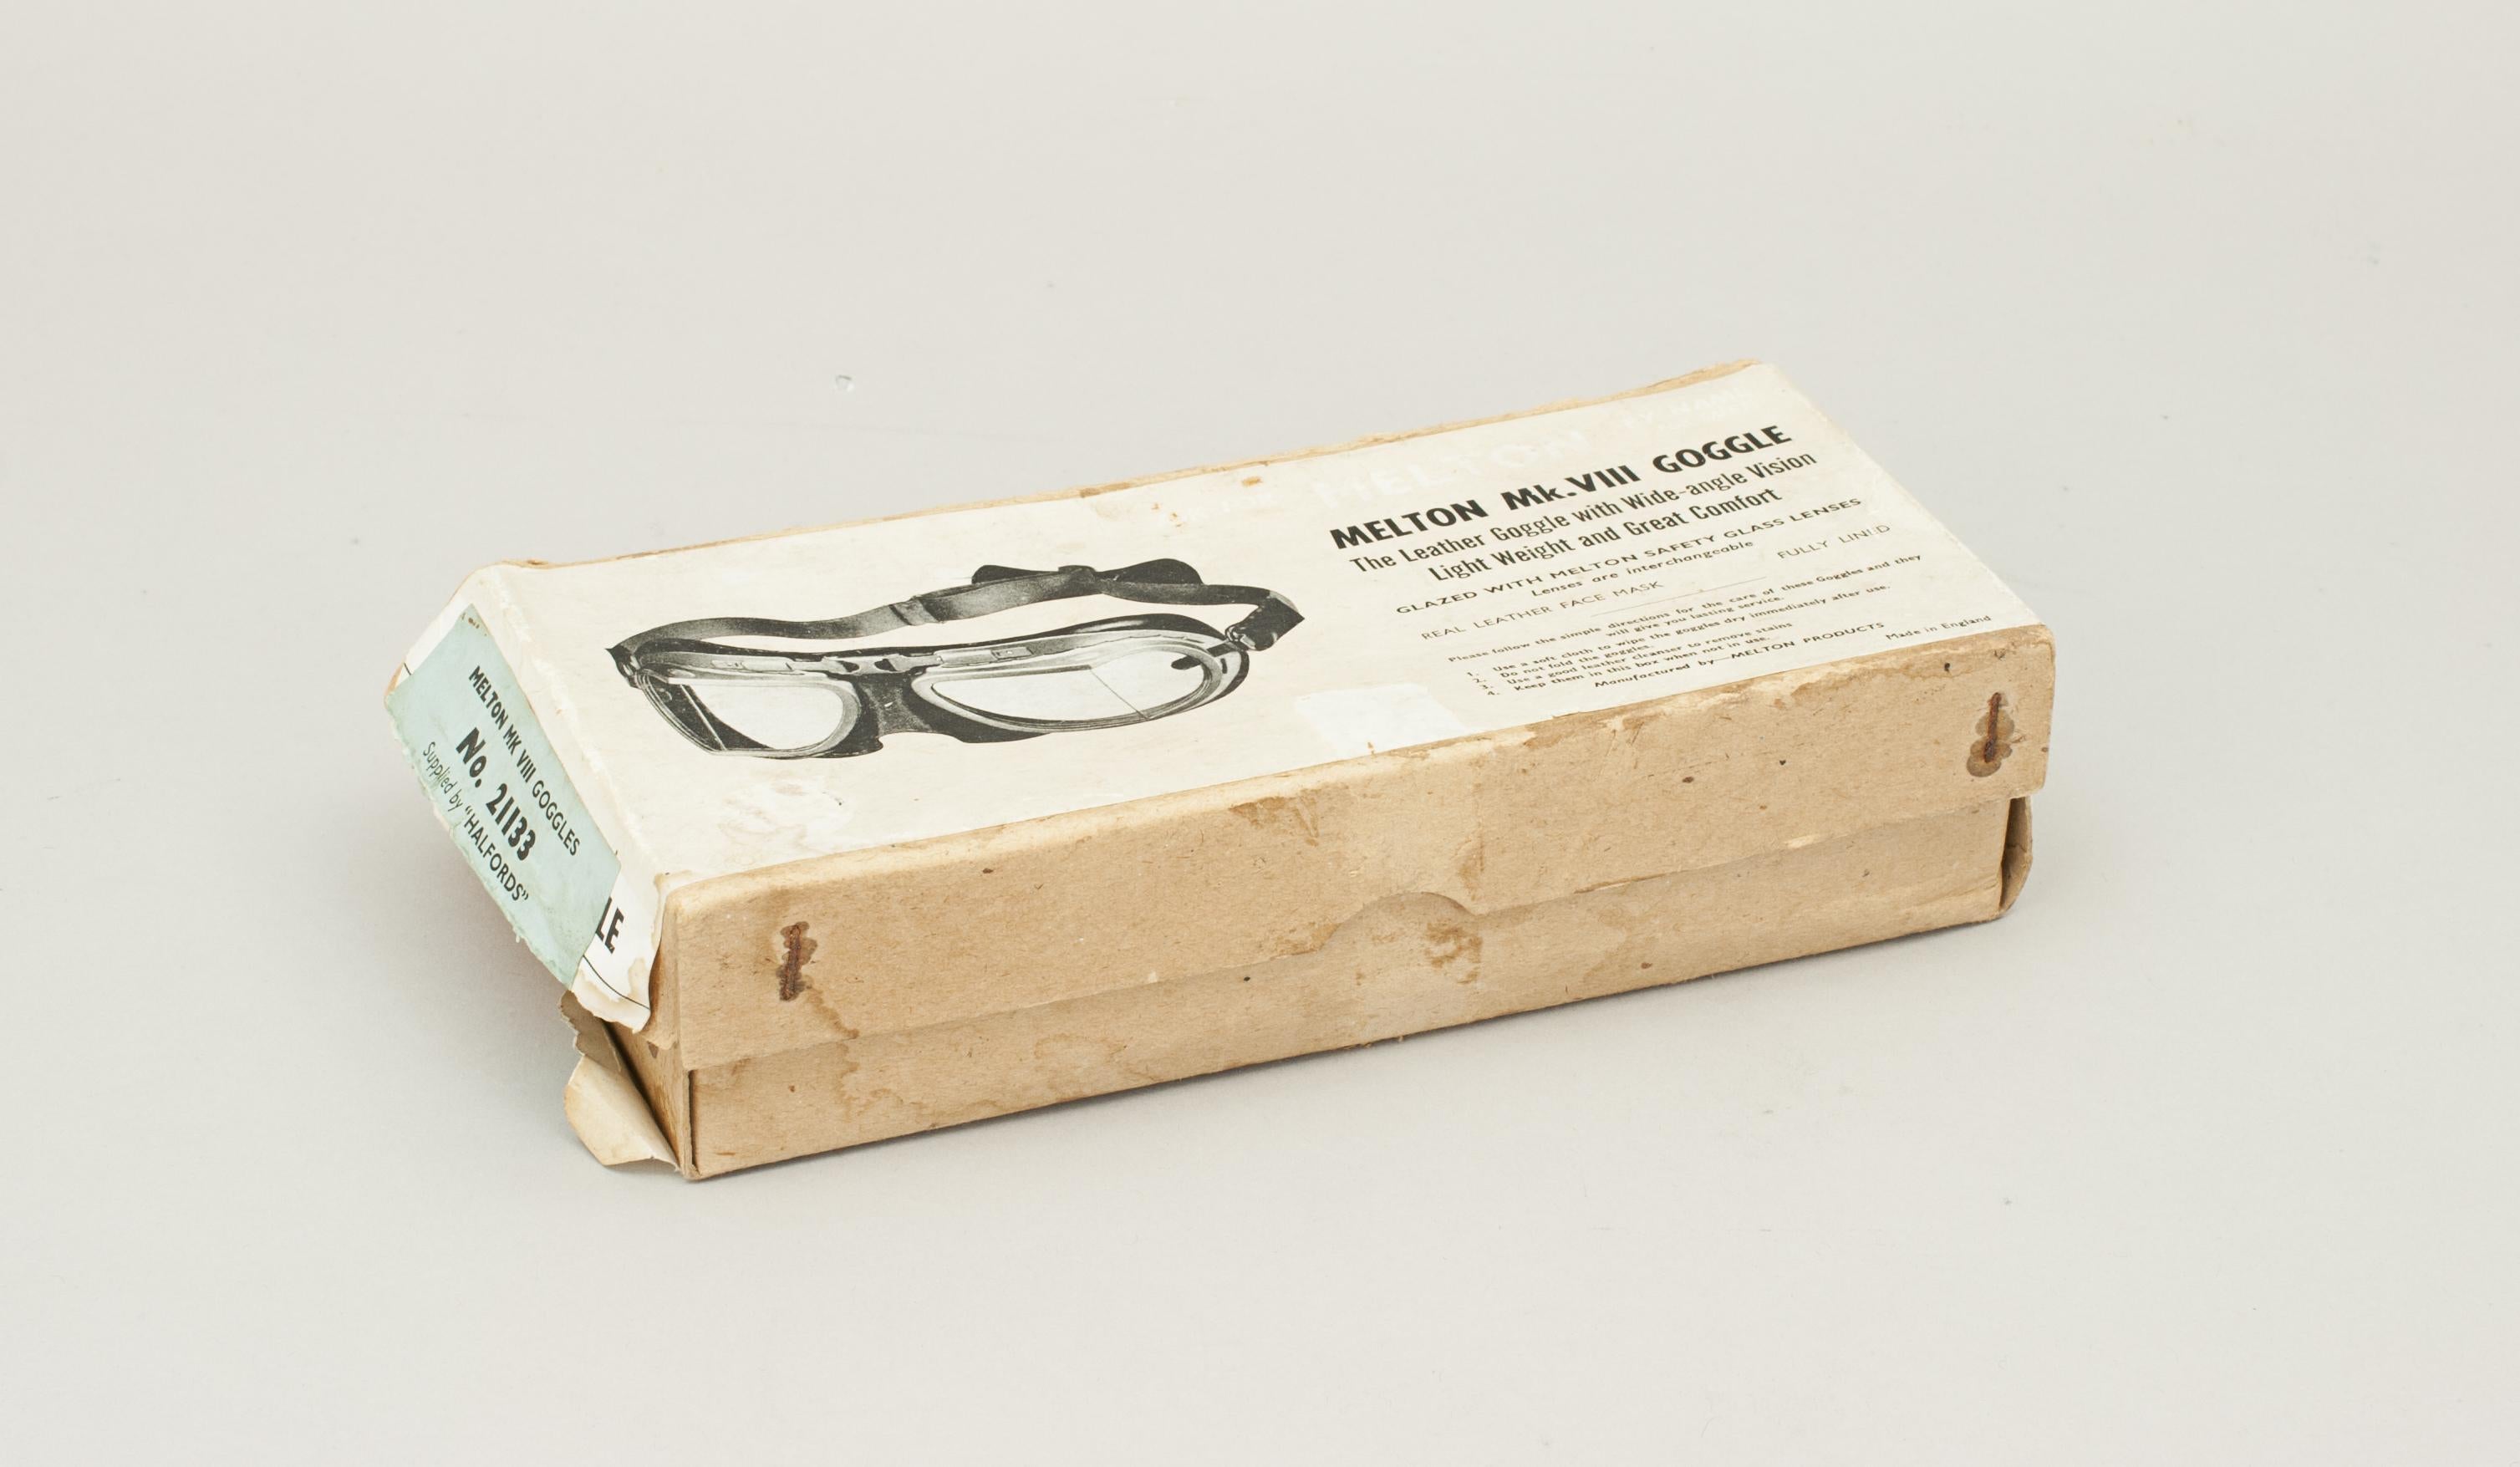 Melton Mk. VIII Goggles supplied by Halfords.
Pair of Melton goggles in good original condition and still in their original cardboard box. The goggles with padded soft brown suede leather facemask and adjustable nose-bridge. The silver painted